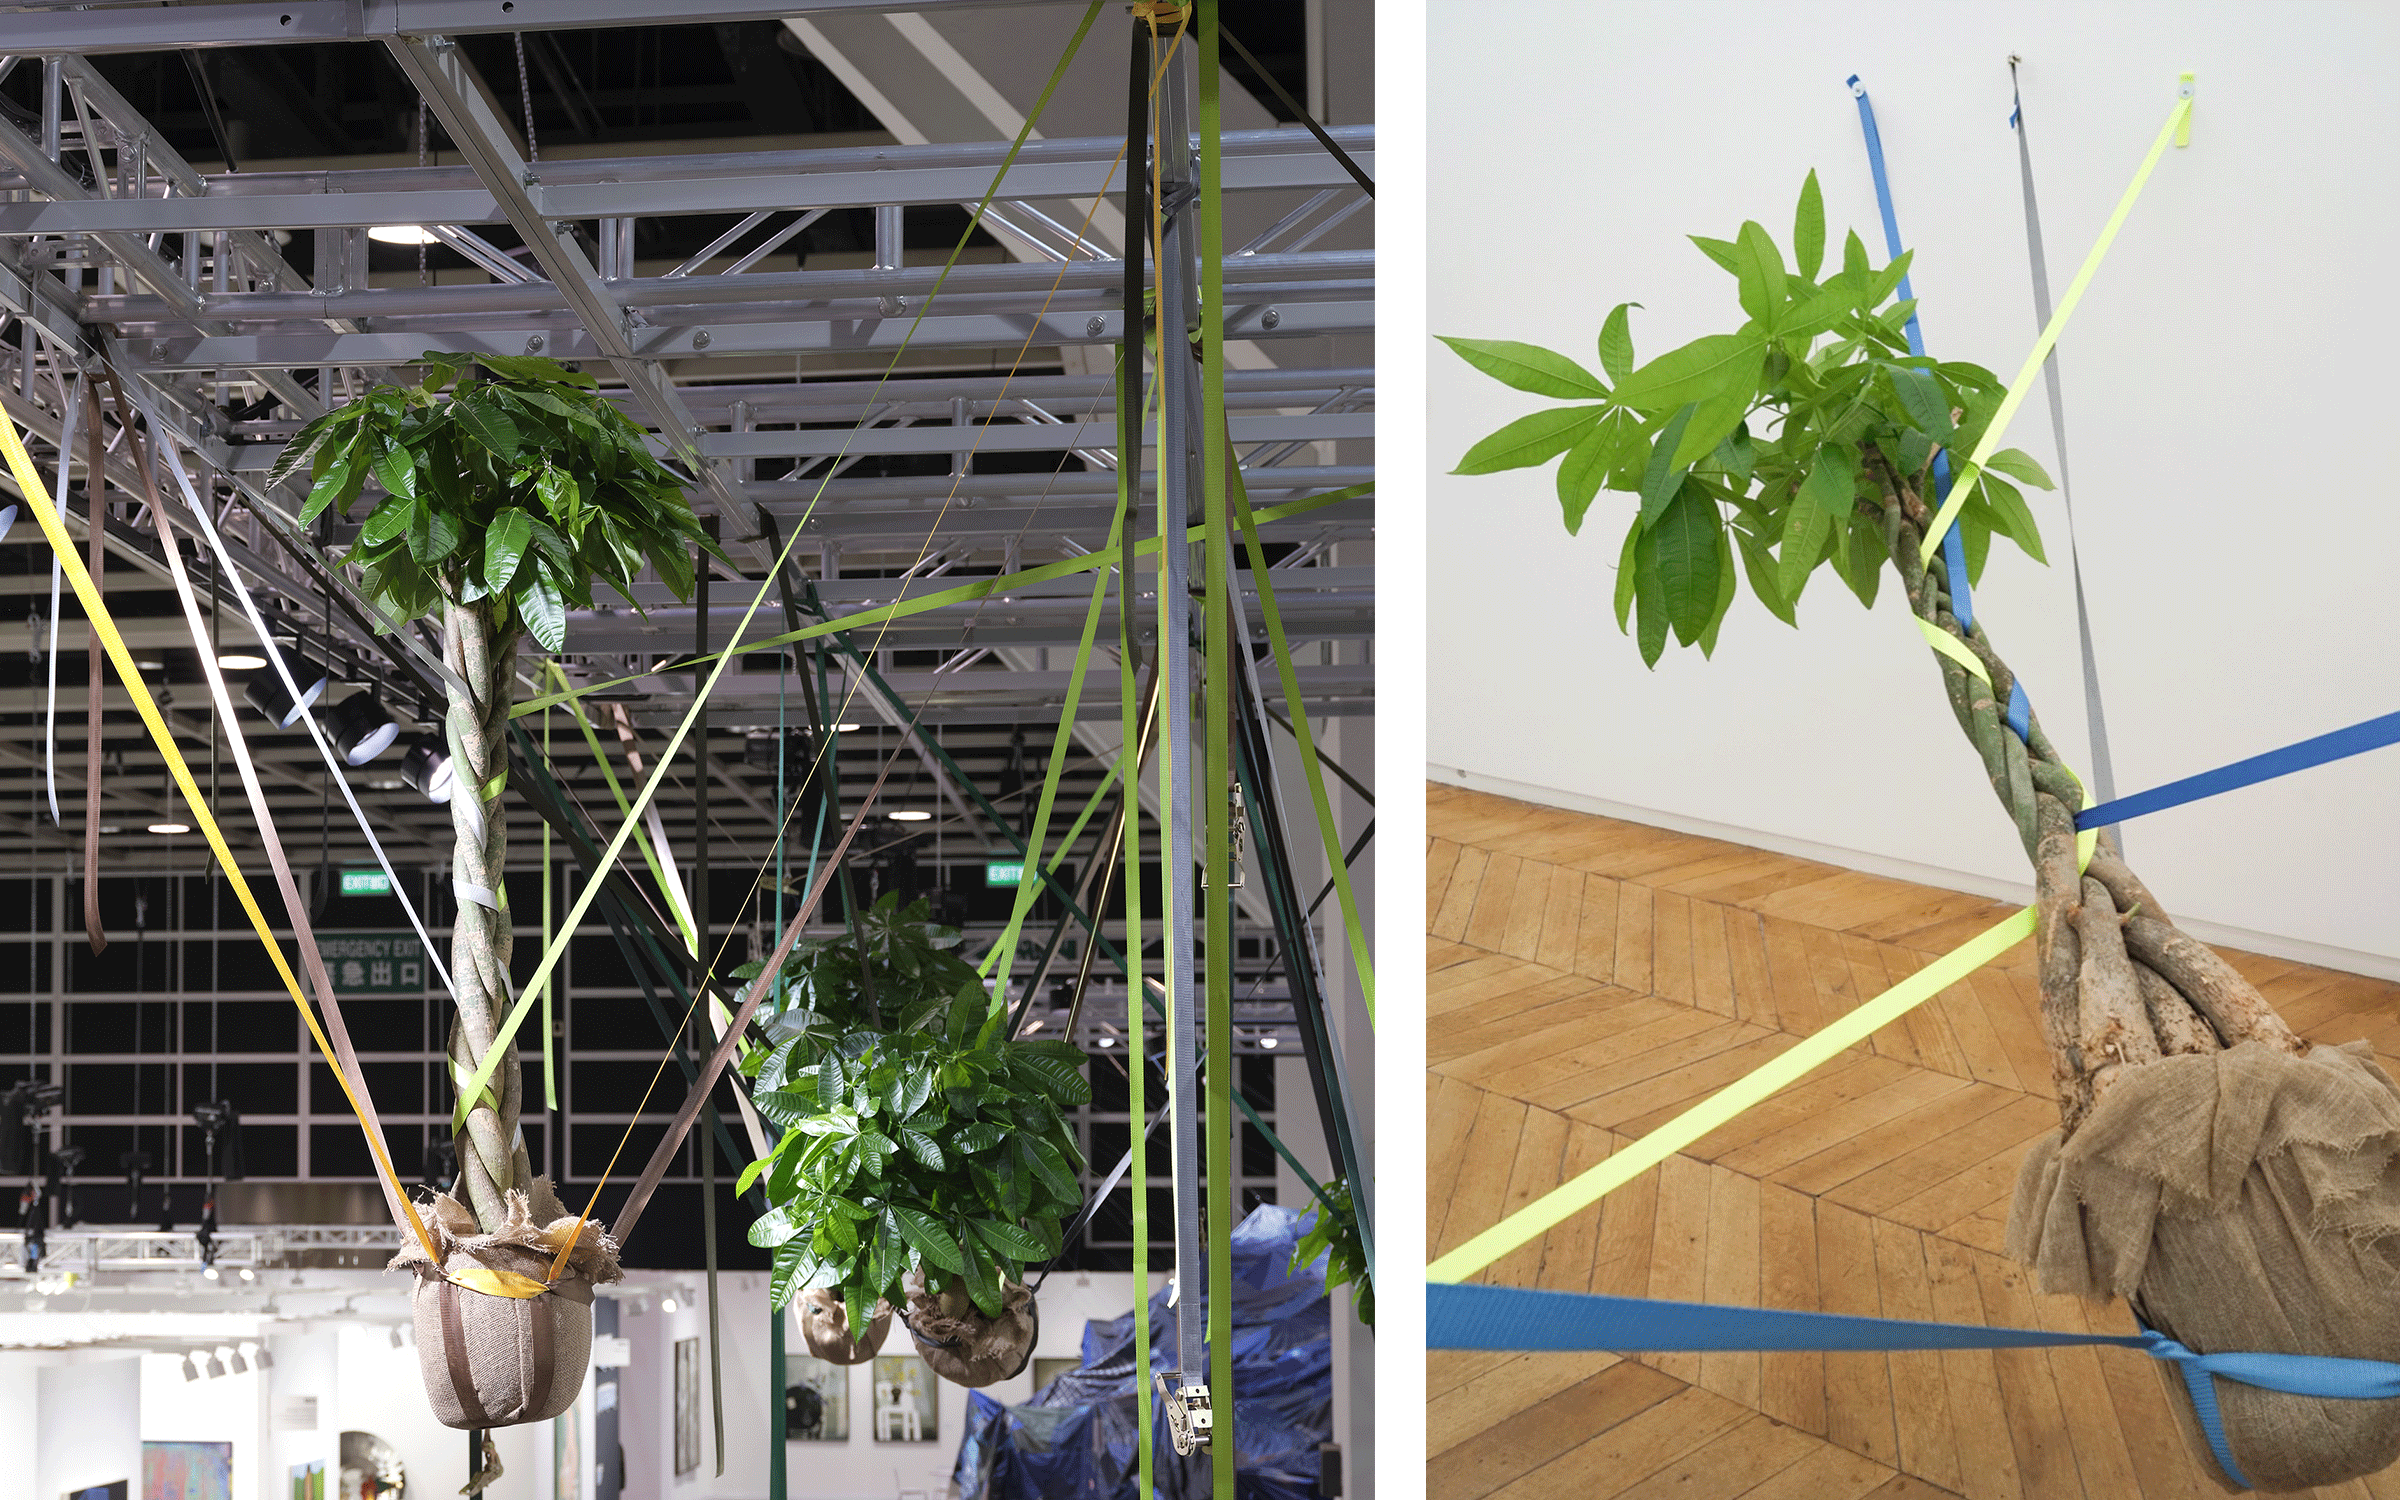 Left: Installation view of Trevor Yeung, Mr. Cuddles Under the Eave at Art Basel Hong Kong 2023 Encounters, 2021. Photograph by South Ho. Courtesy of the artist and Blindspot Gallery. Right: Trevor Yeung, Suspended Mr. Cuddle, 2019. Courtesy of the artist and Galerie Allen.